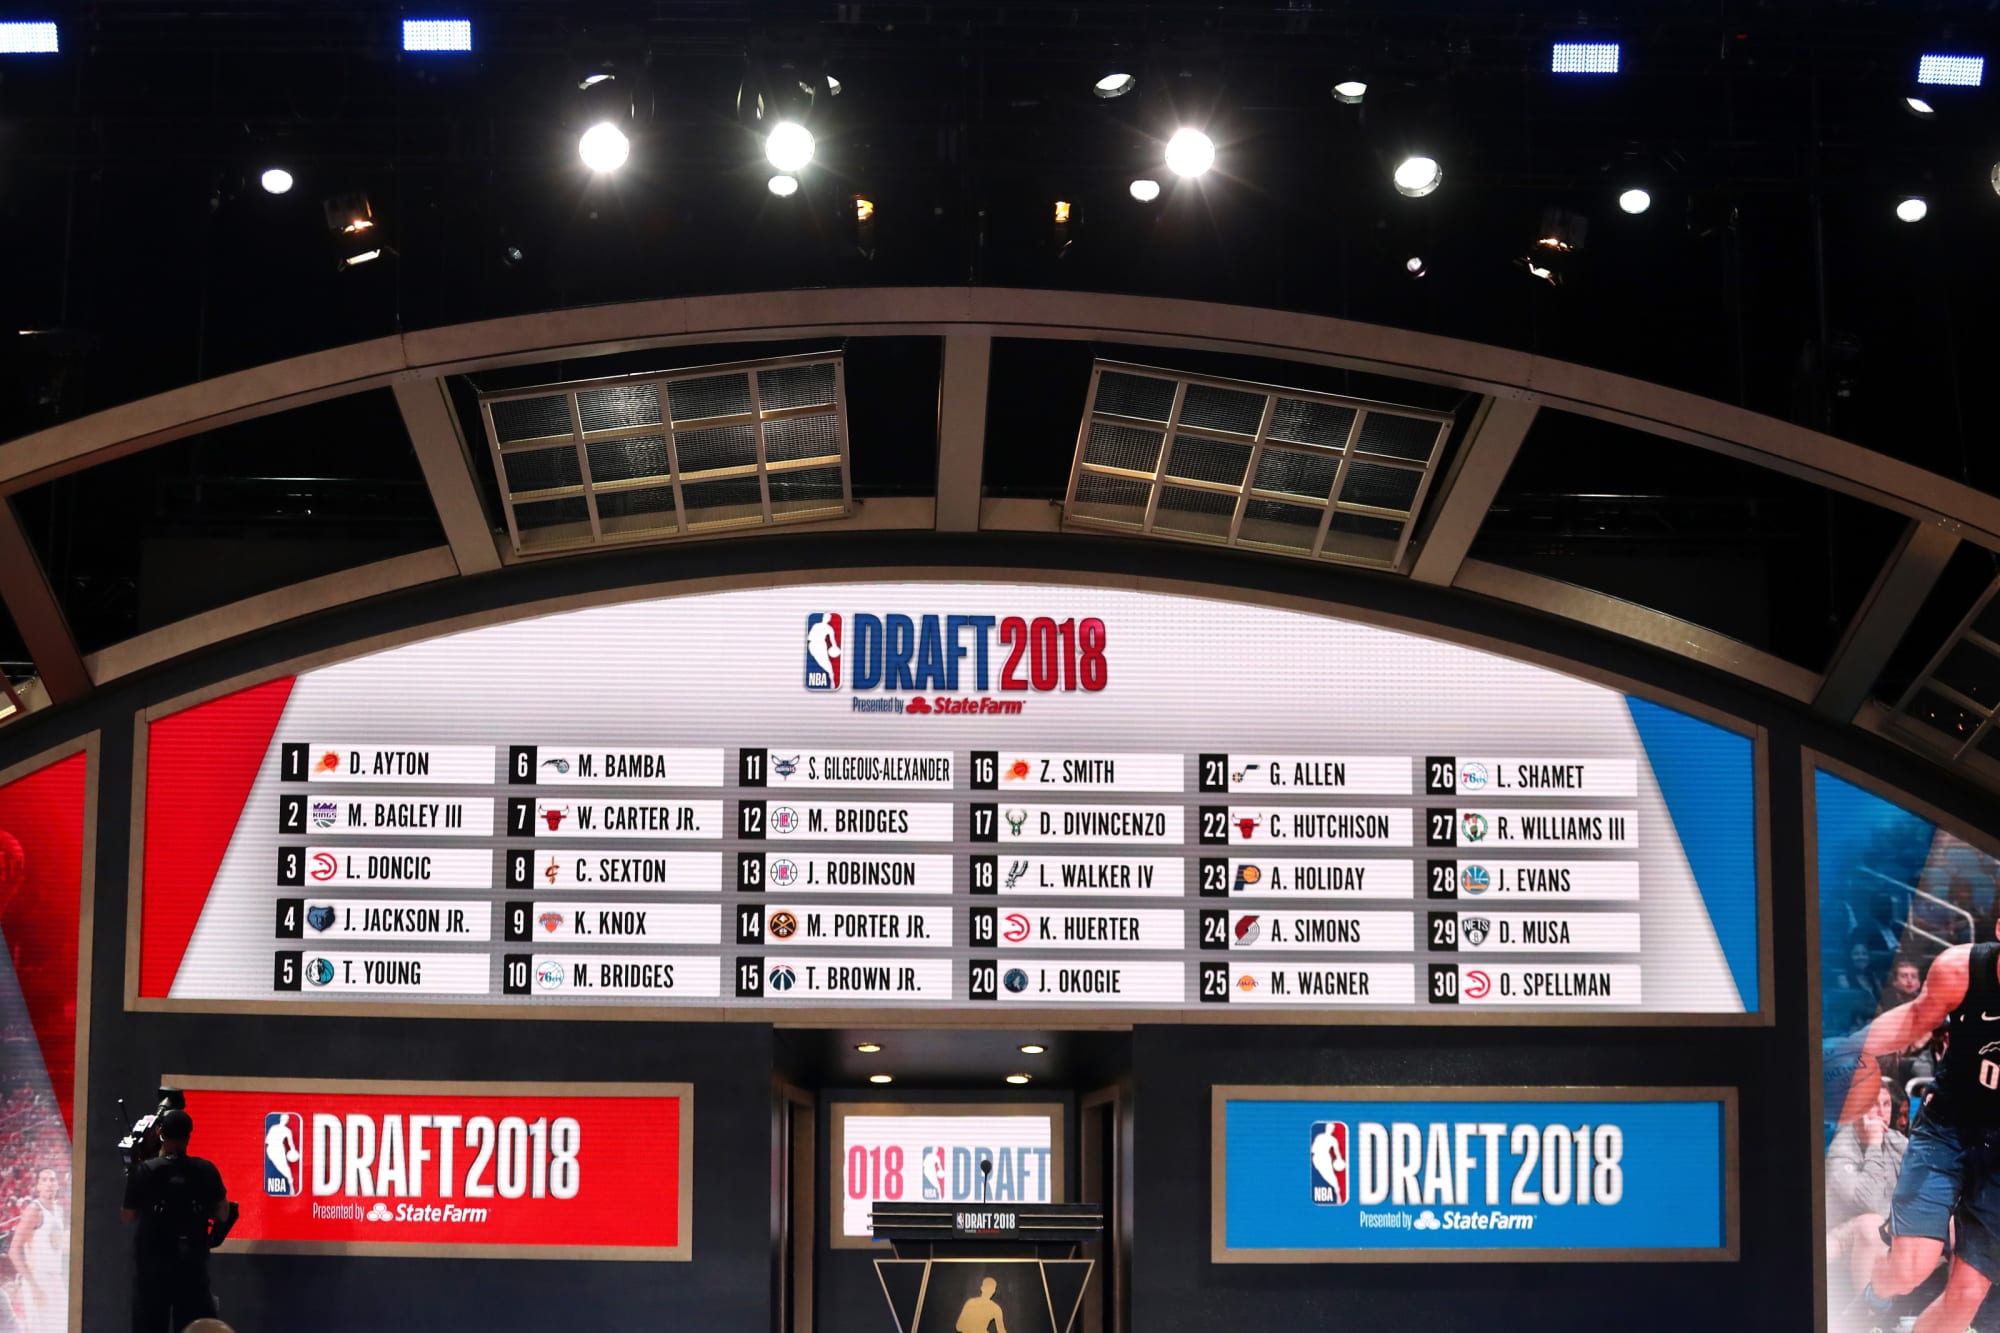 NBA Draft 2020 Start time, live stream, TV info and more